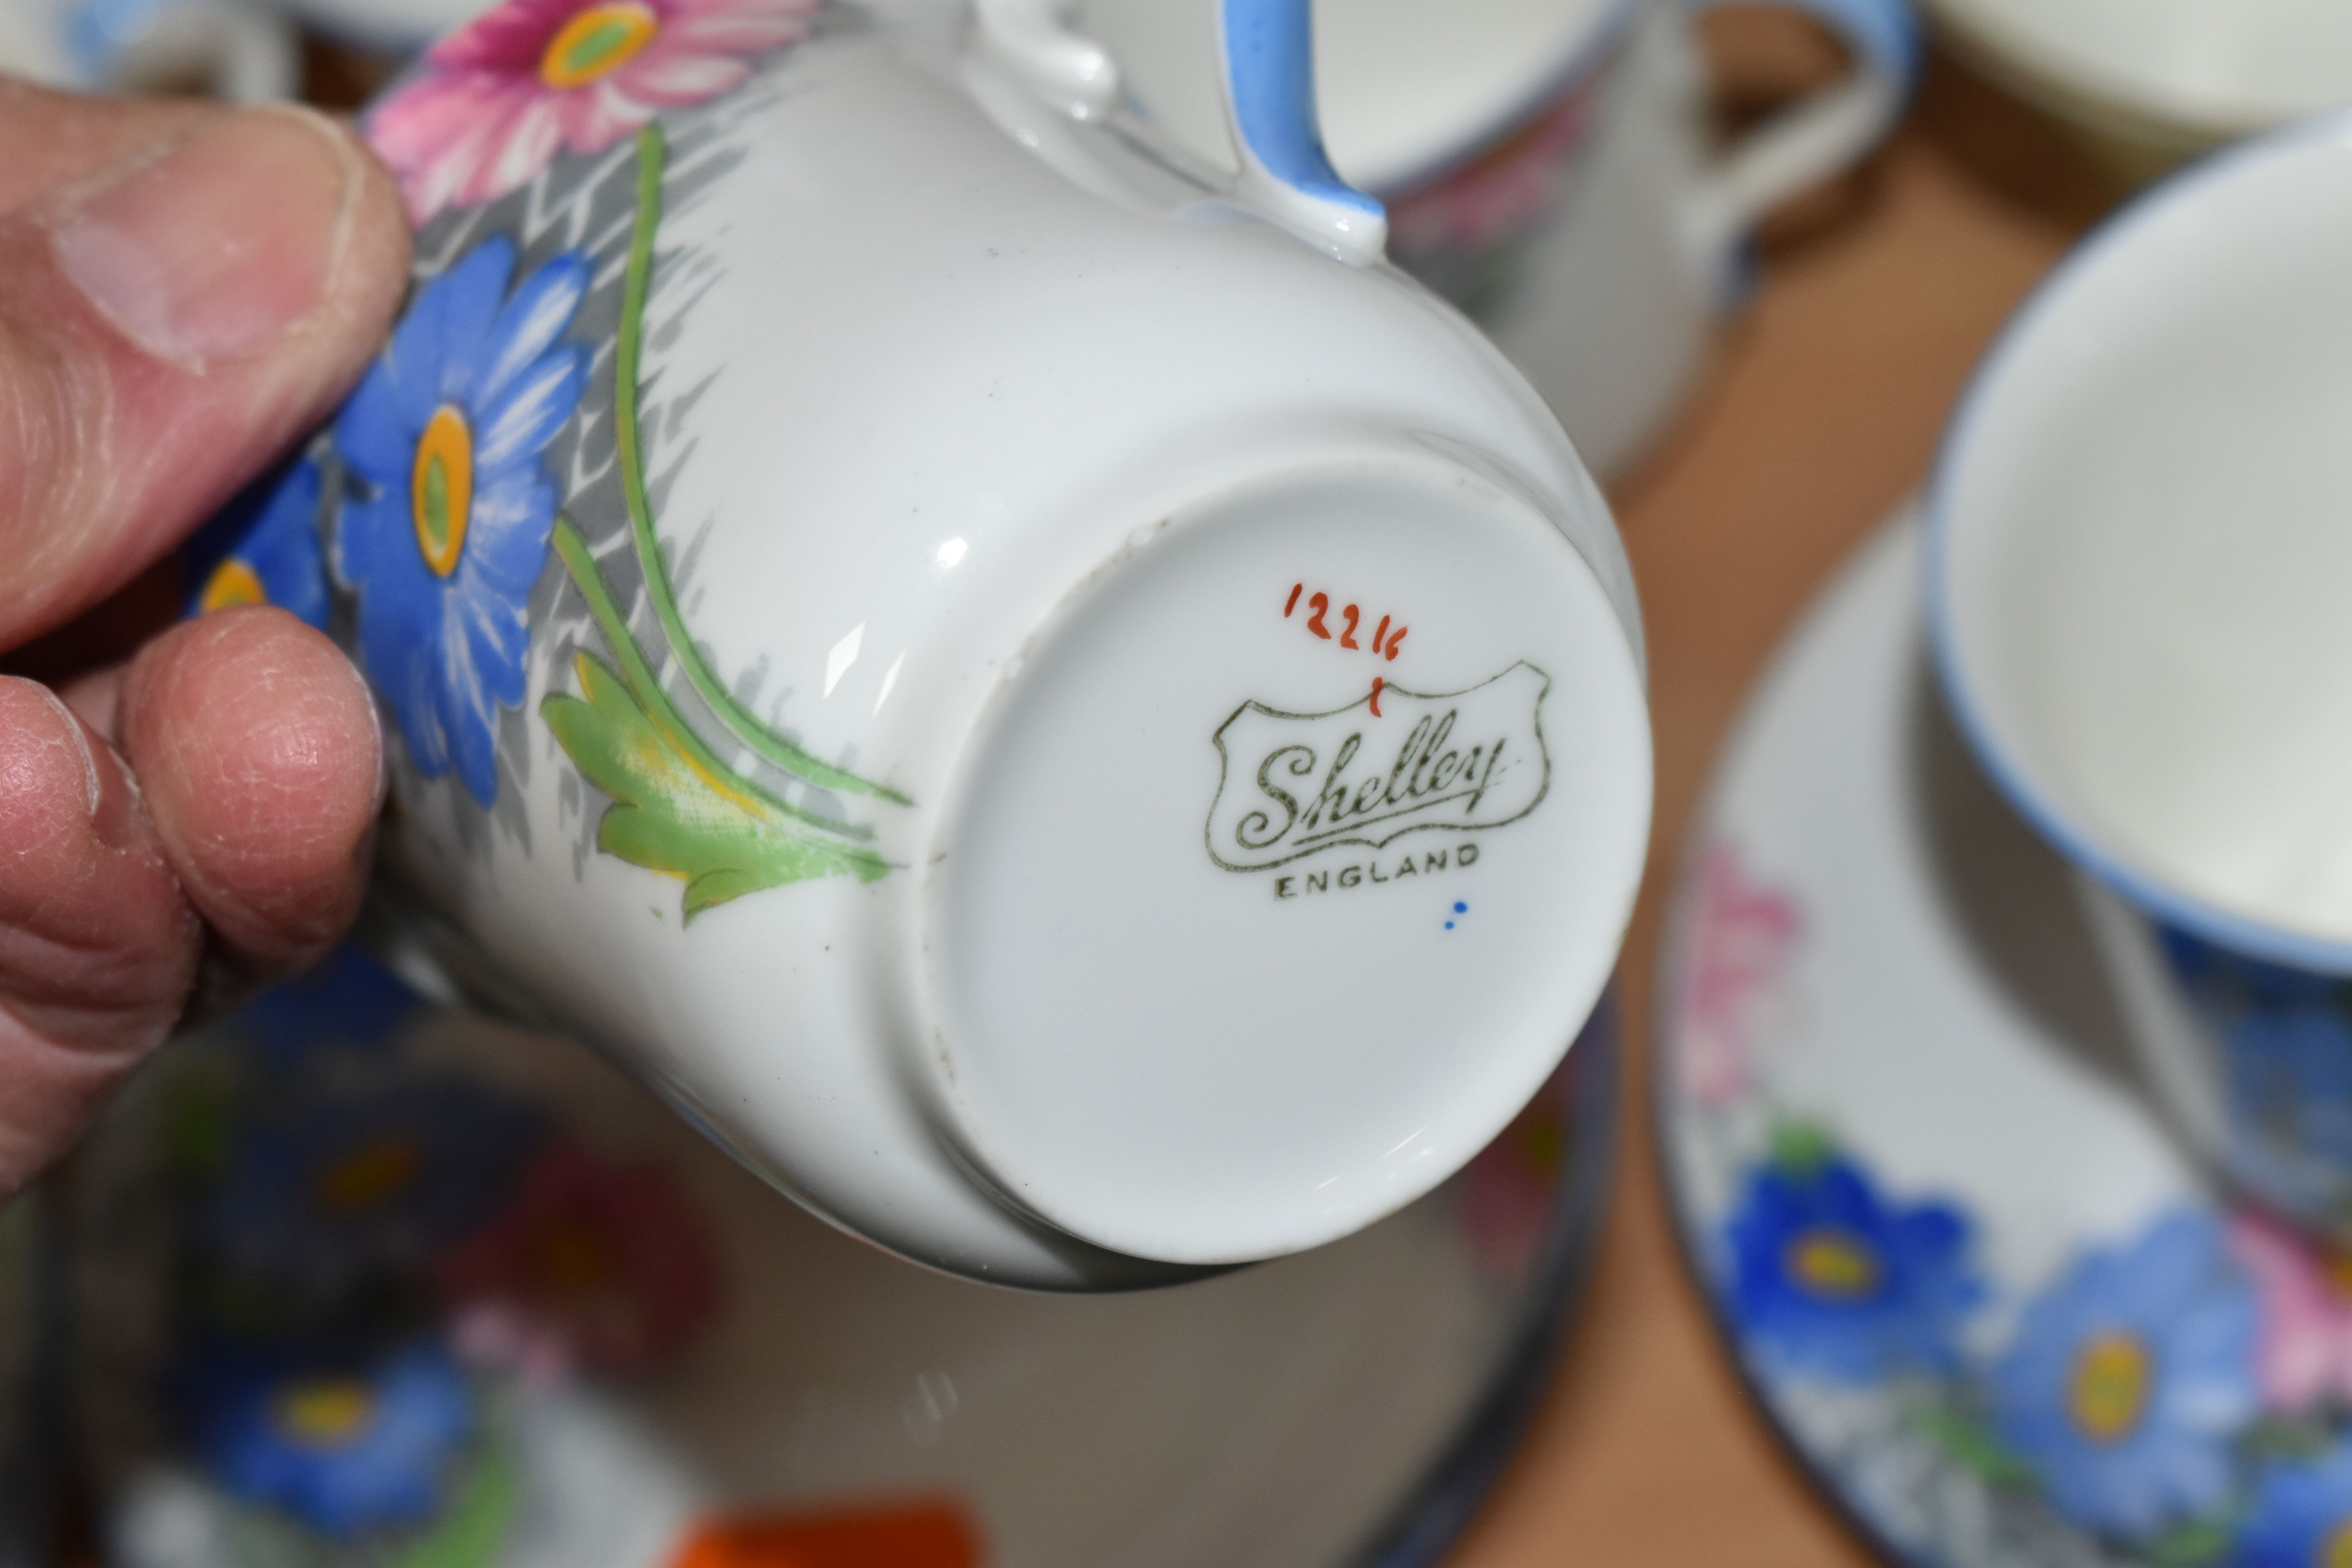 A SHELLEY COFFEE SET, pattern number 12216, decorated with a blue and pink floral design on a - Image 5 of 6